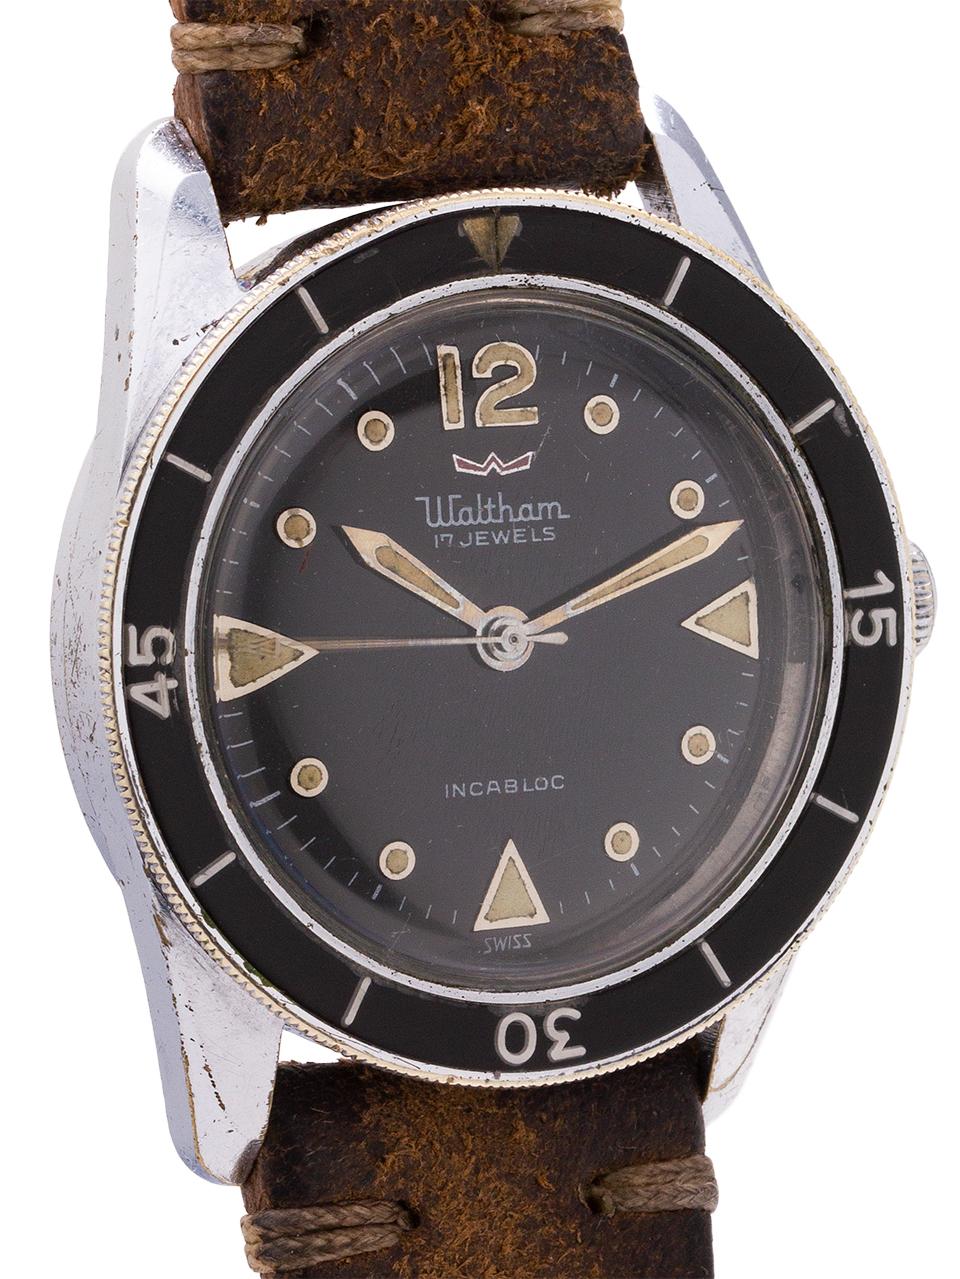 
An incredibly rare Waltham Incabloc, the American version of the famous Blancpain Bathyscaphe. Featuring a 36mm case with stainless steel screw down case back and with black bakelite elapsed time bezel. Featuring a beautiful condition original